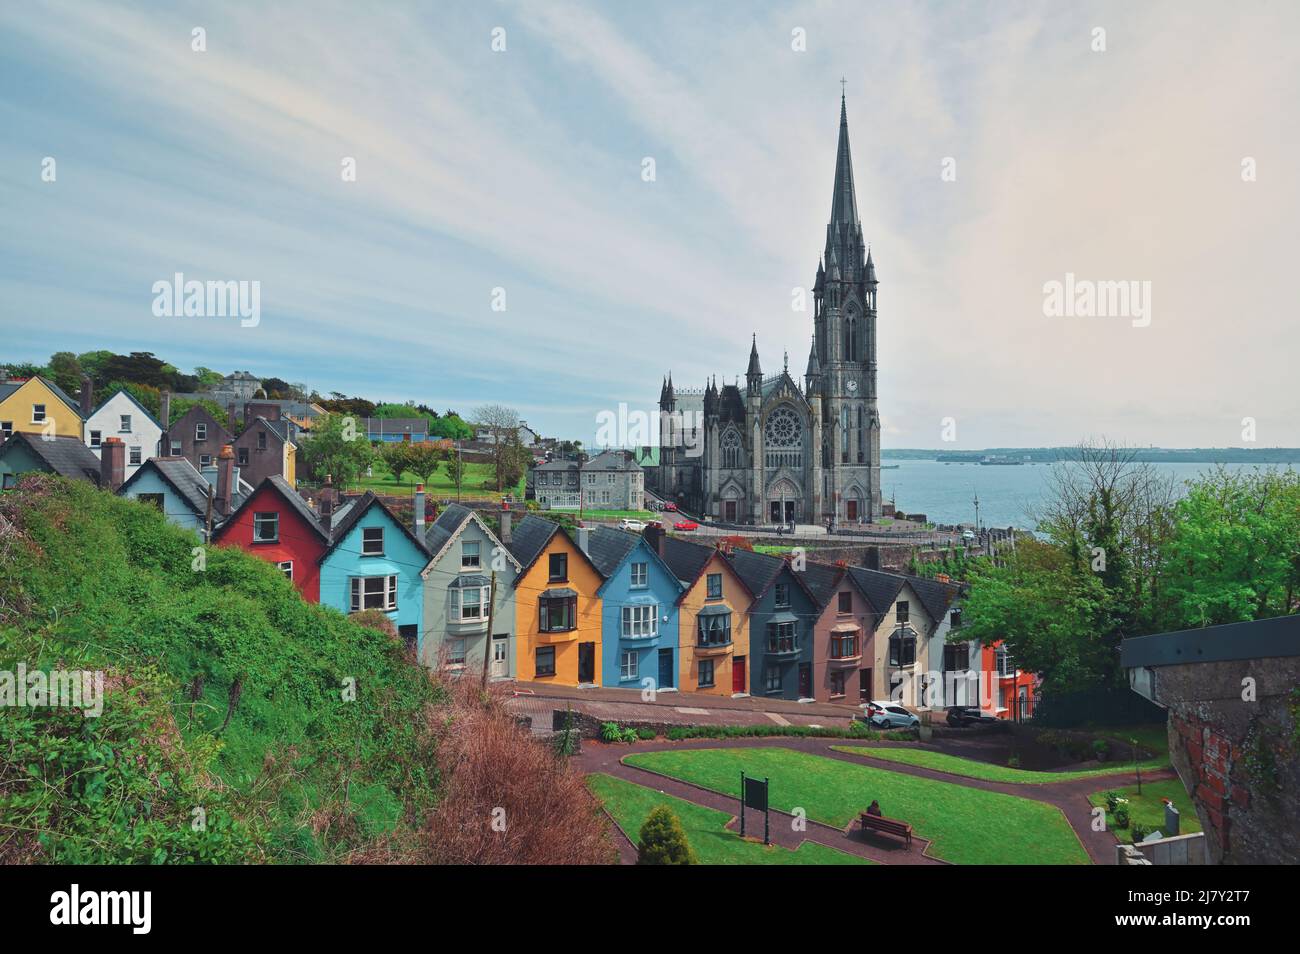 St. Colman's Cathedral And Colored Houses In Cobh, Ireland in Summer Stock Photo